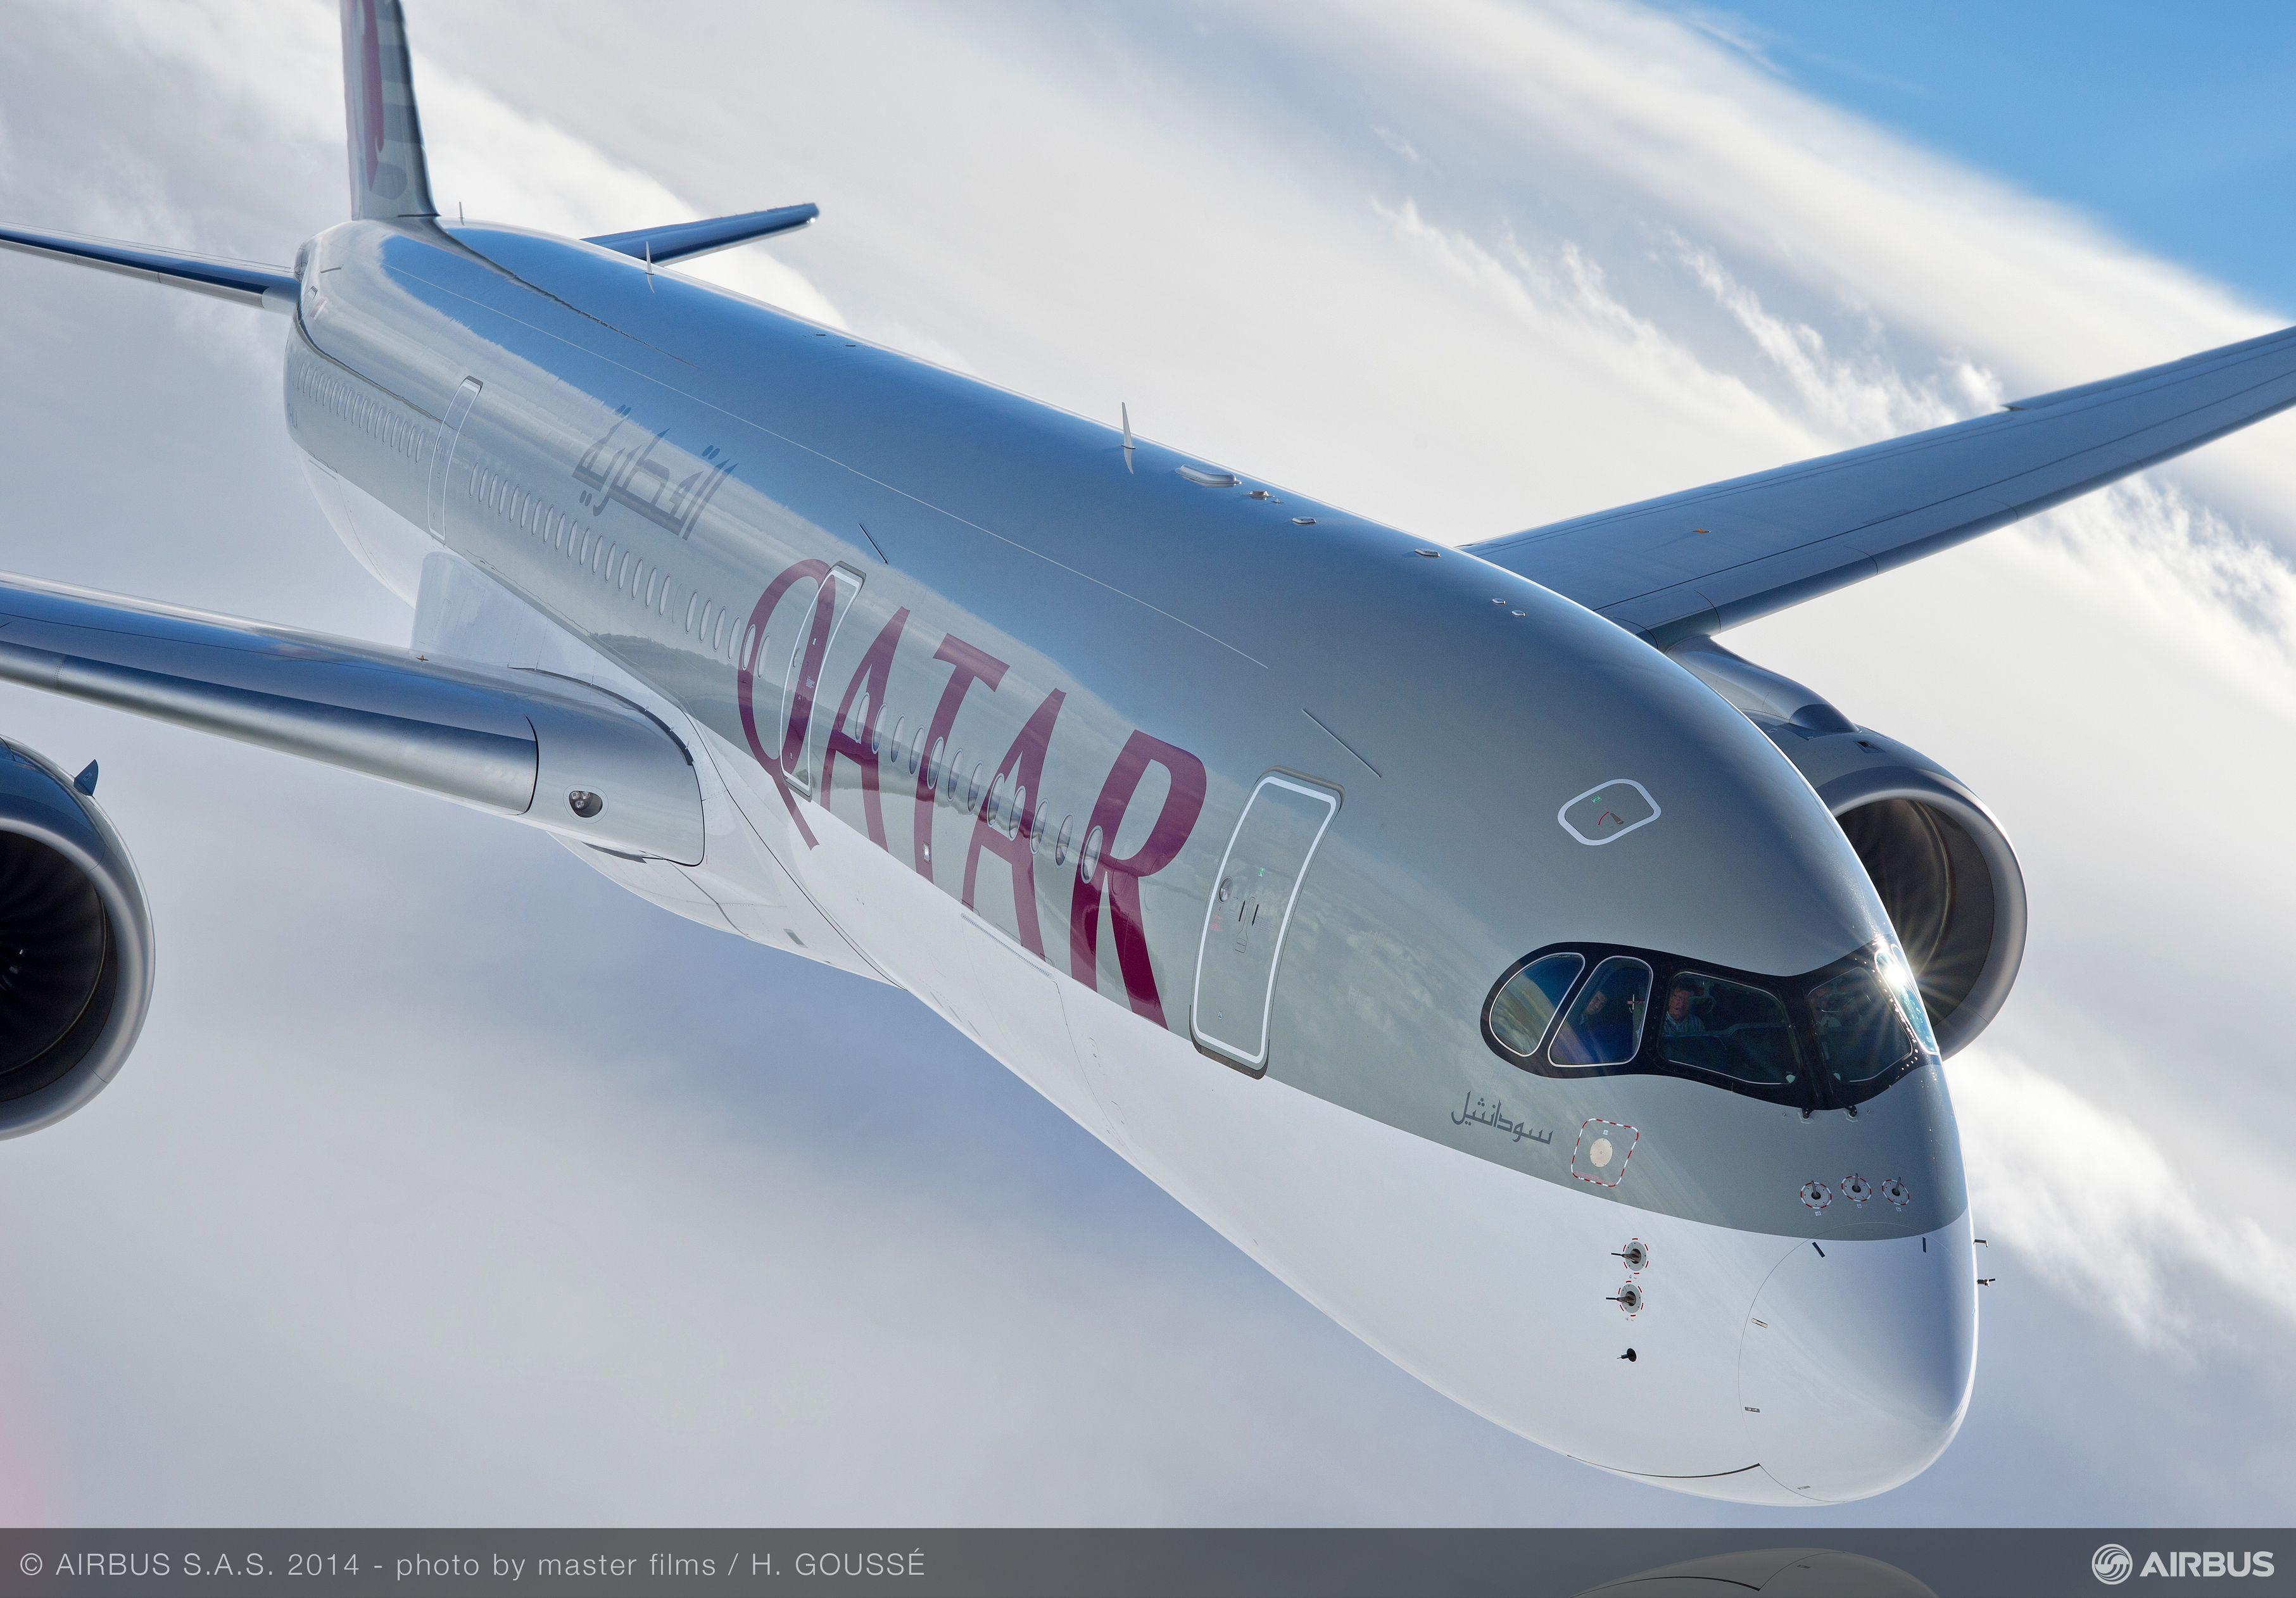 Airbus delivers first ever A350 XWB to Qatar Airways. Airbus